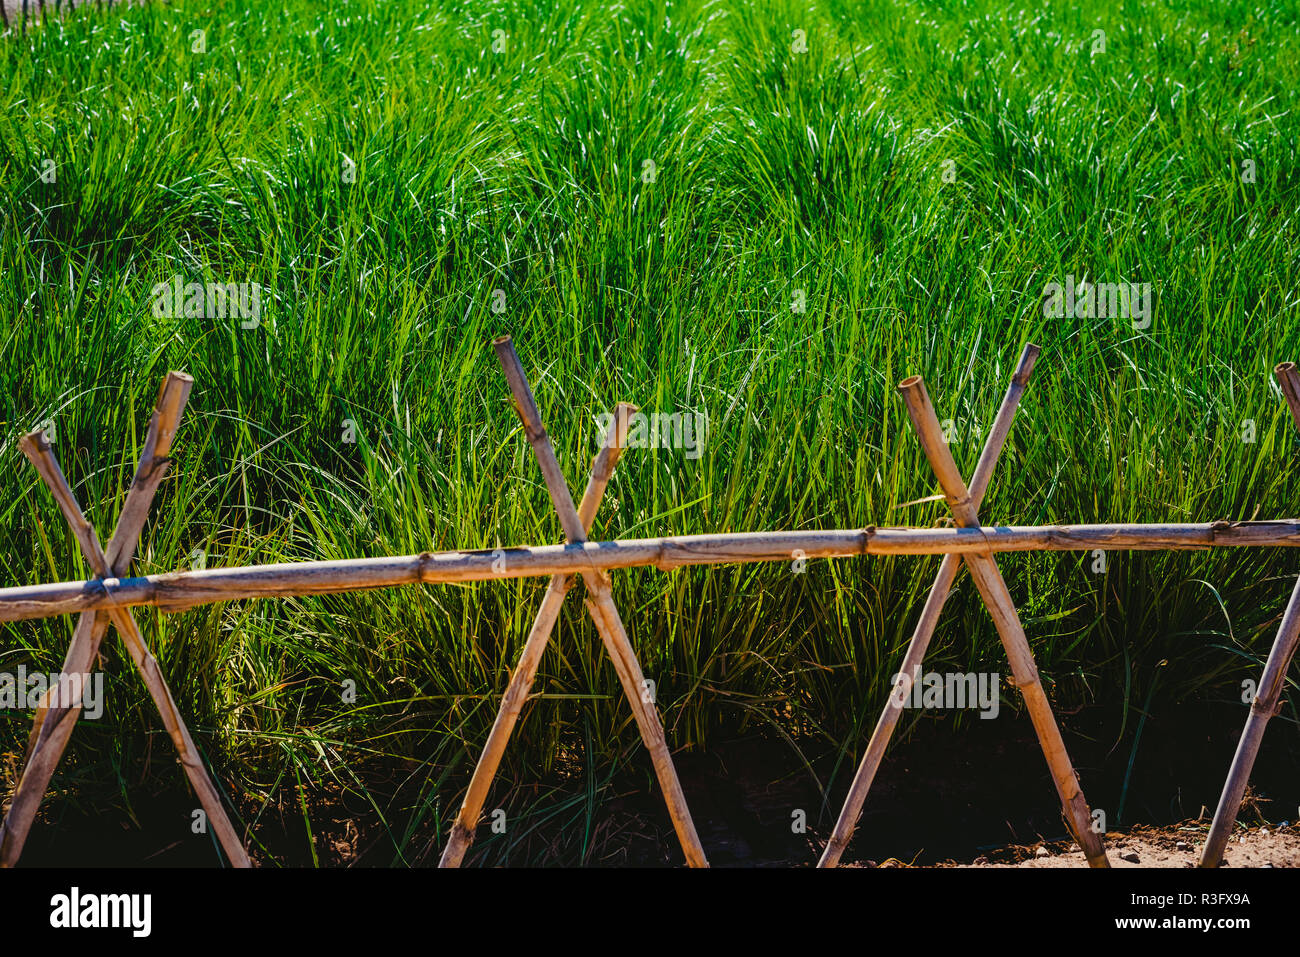 Plantation of tigernuts in Valencia with high green and tall grasses. Stock Photo